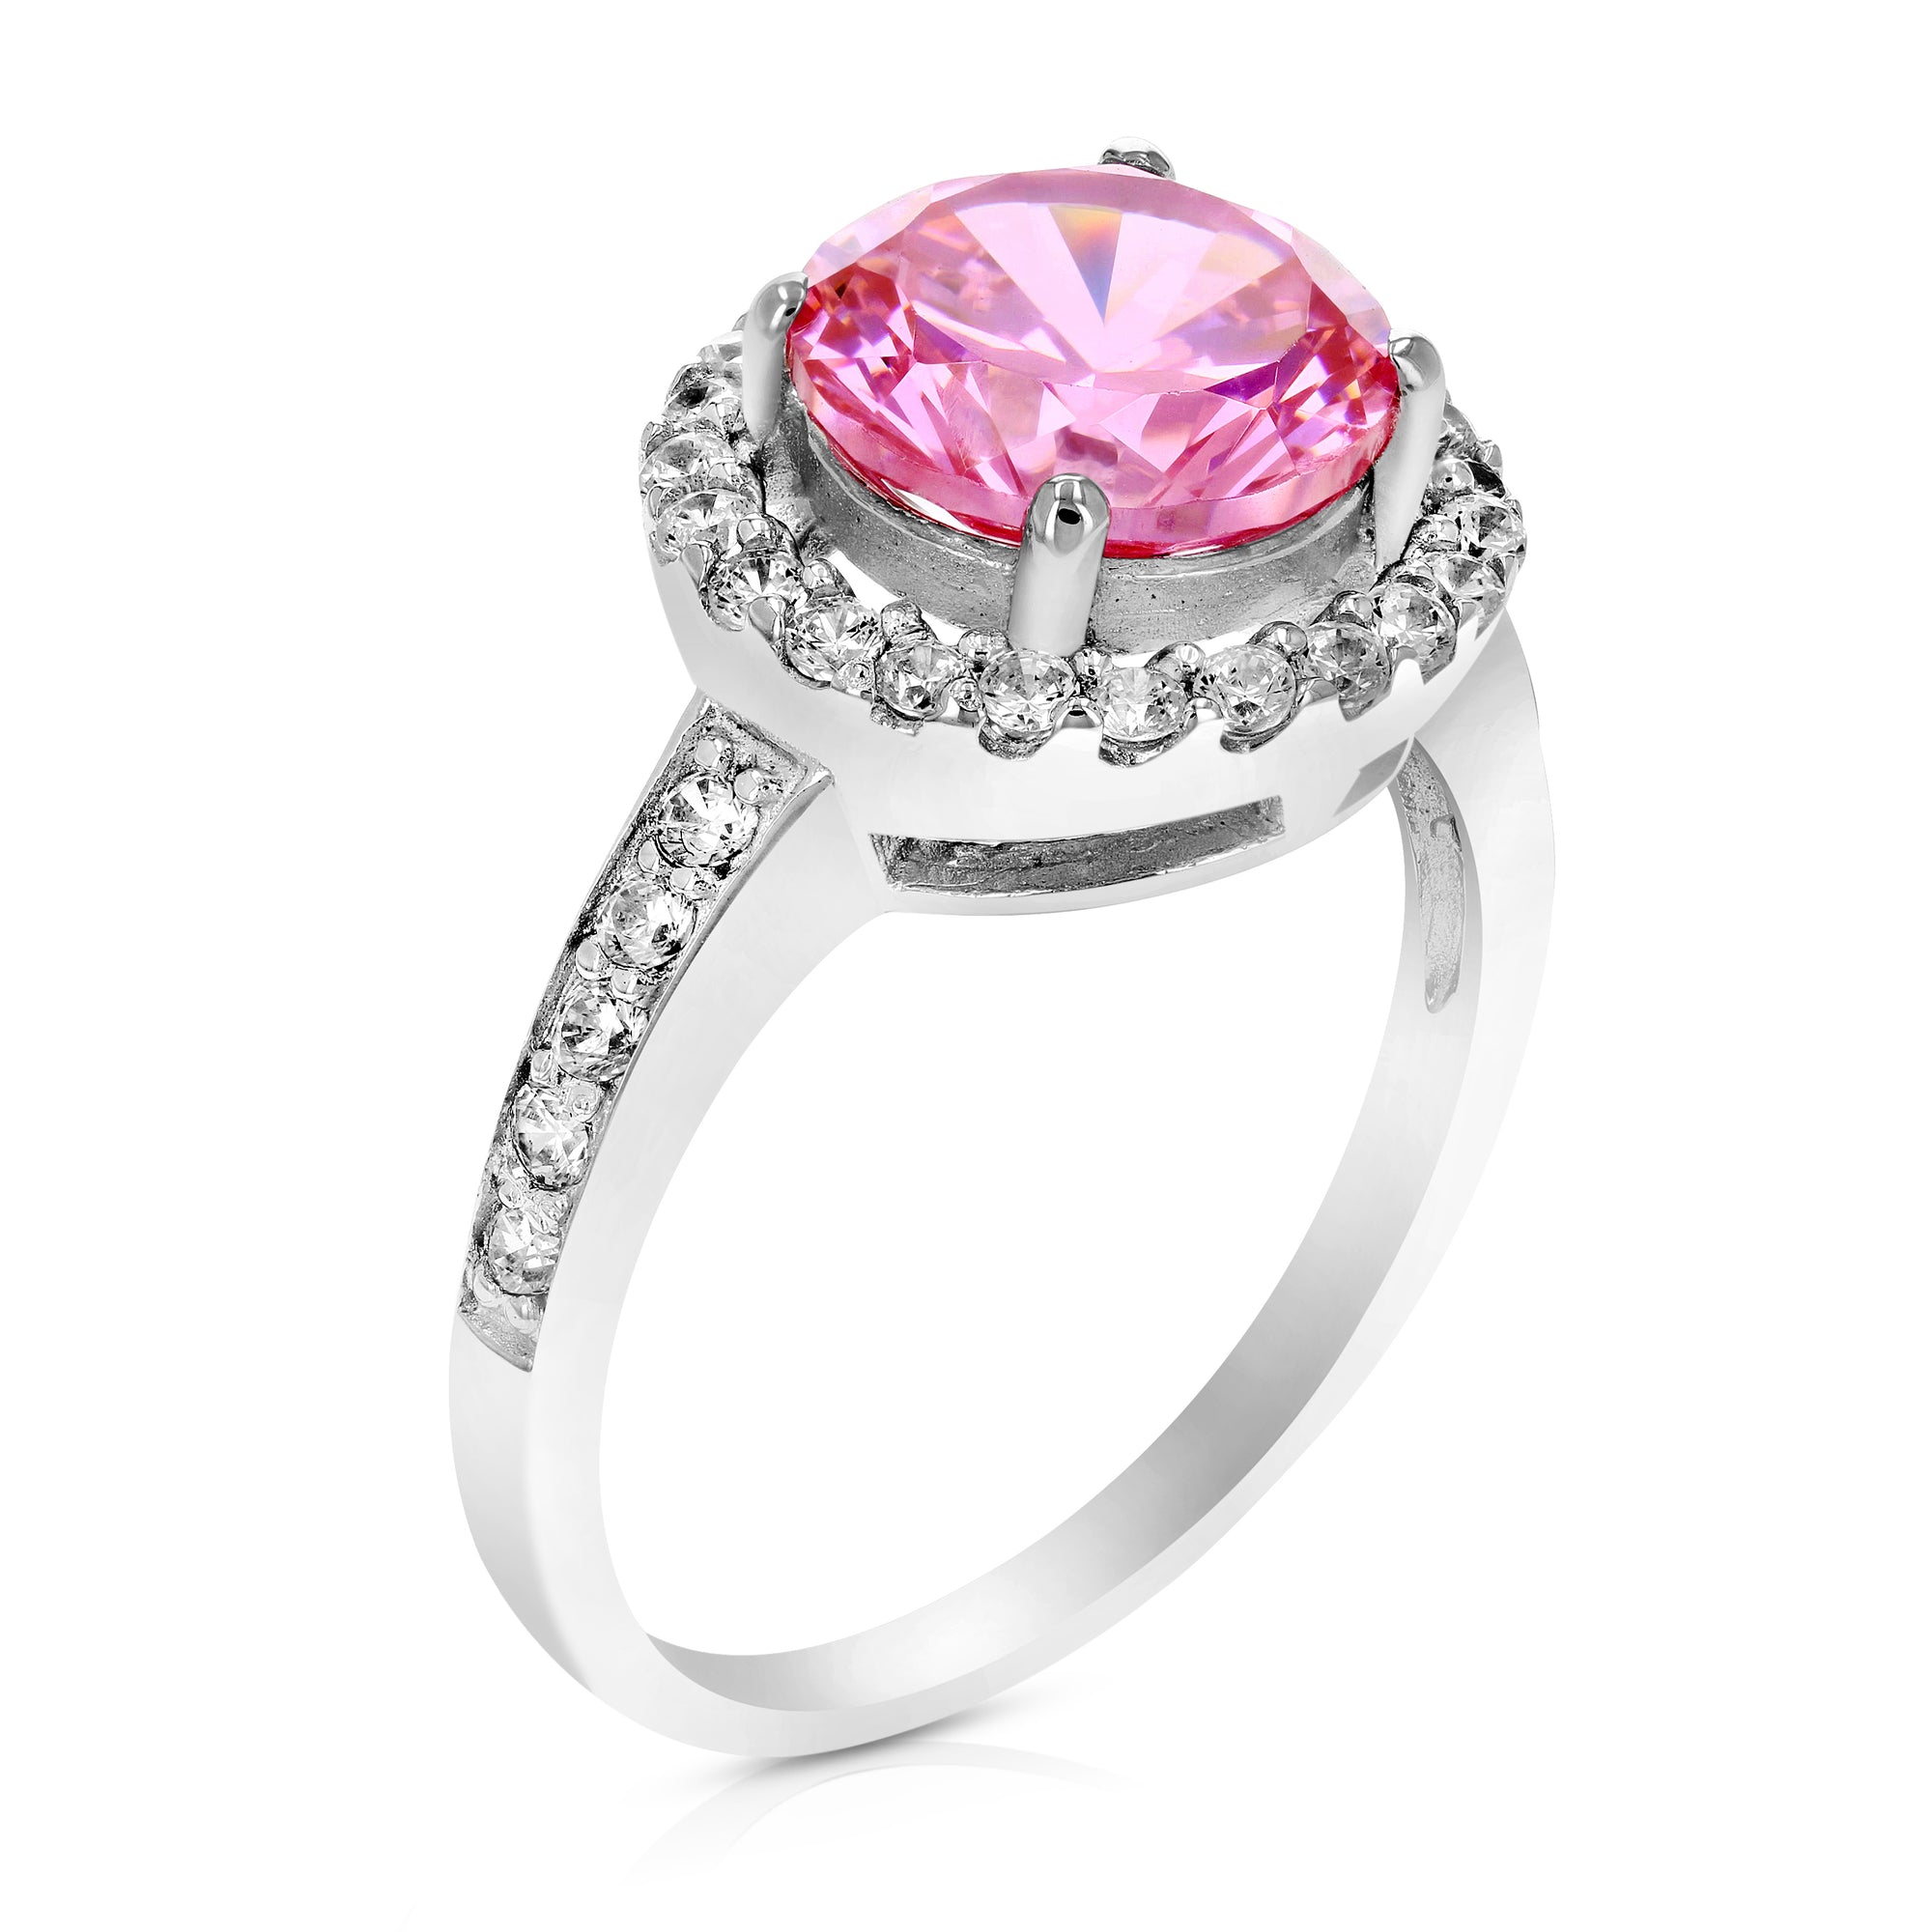 8 MM Pink Cubic Zirconia Halo Ring .925 Sterling Silver with Rhodium Round Shape